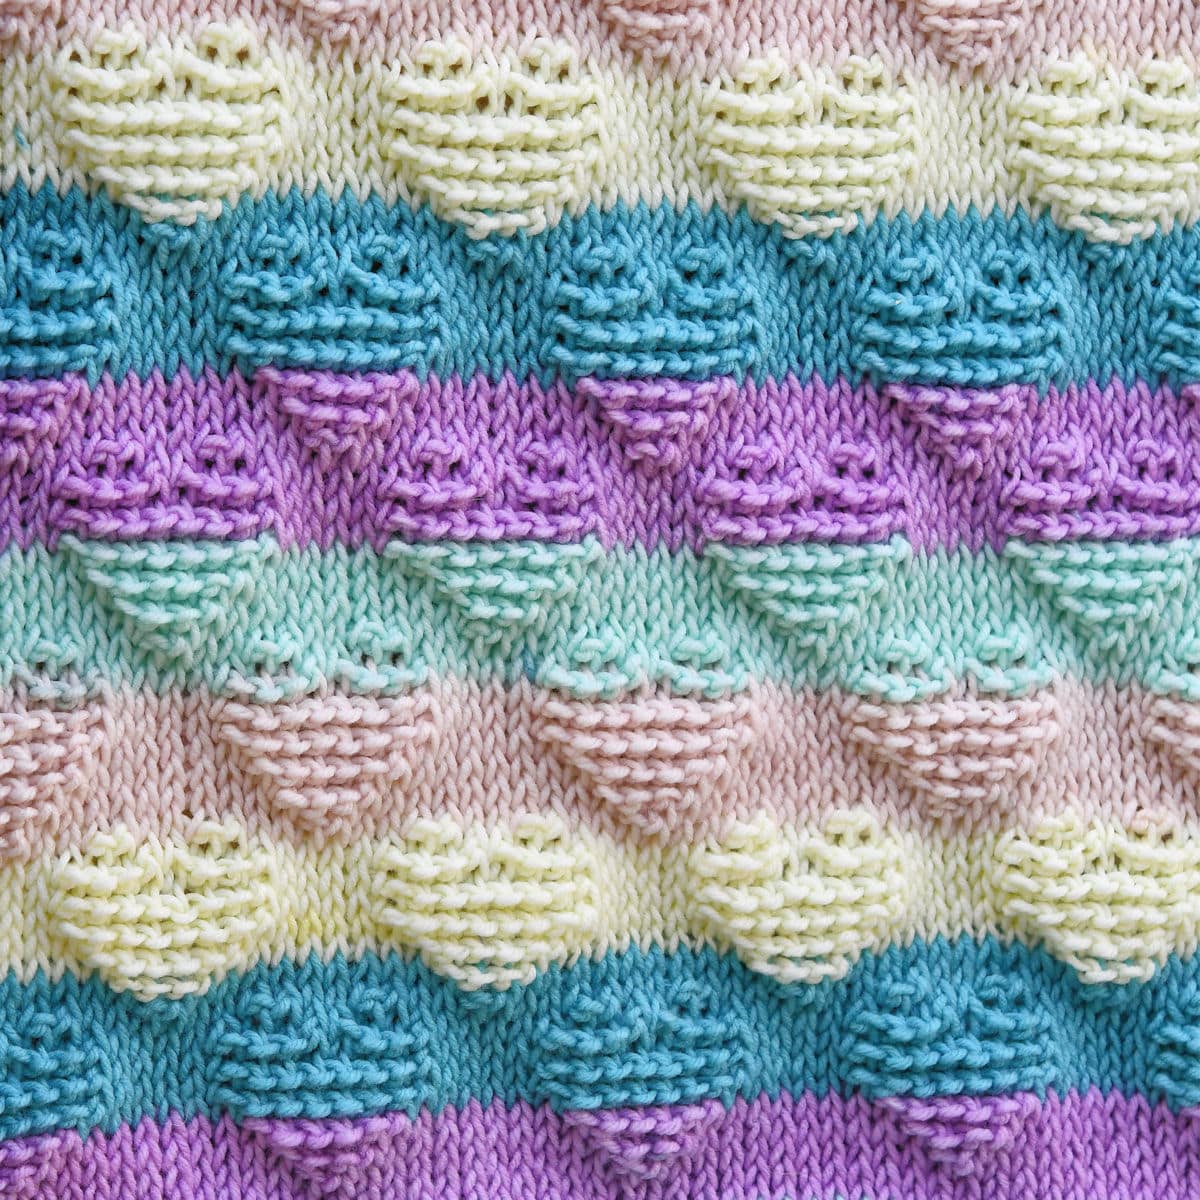 close up showing heart motif stitch pattern of Striped Hearts Baby Afghan